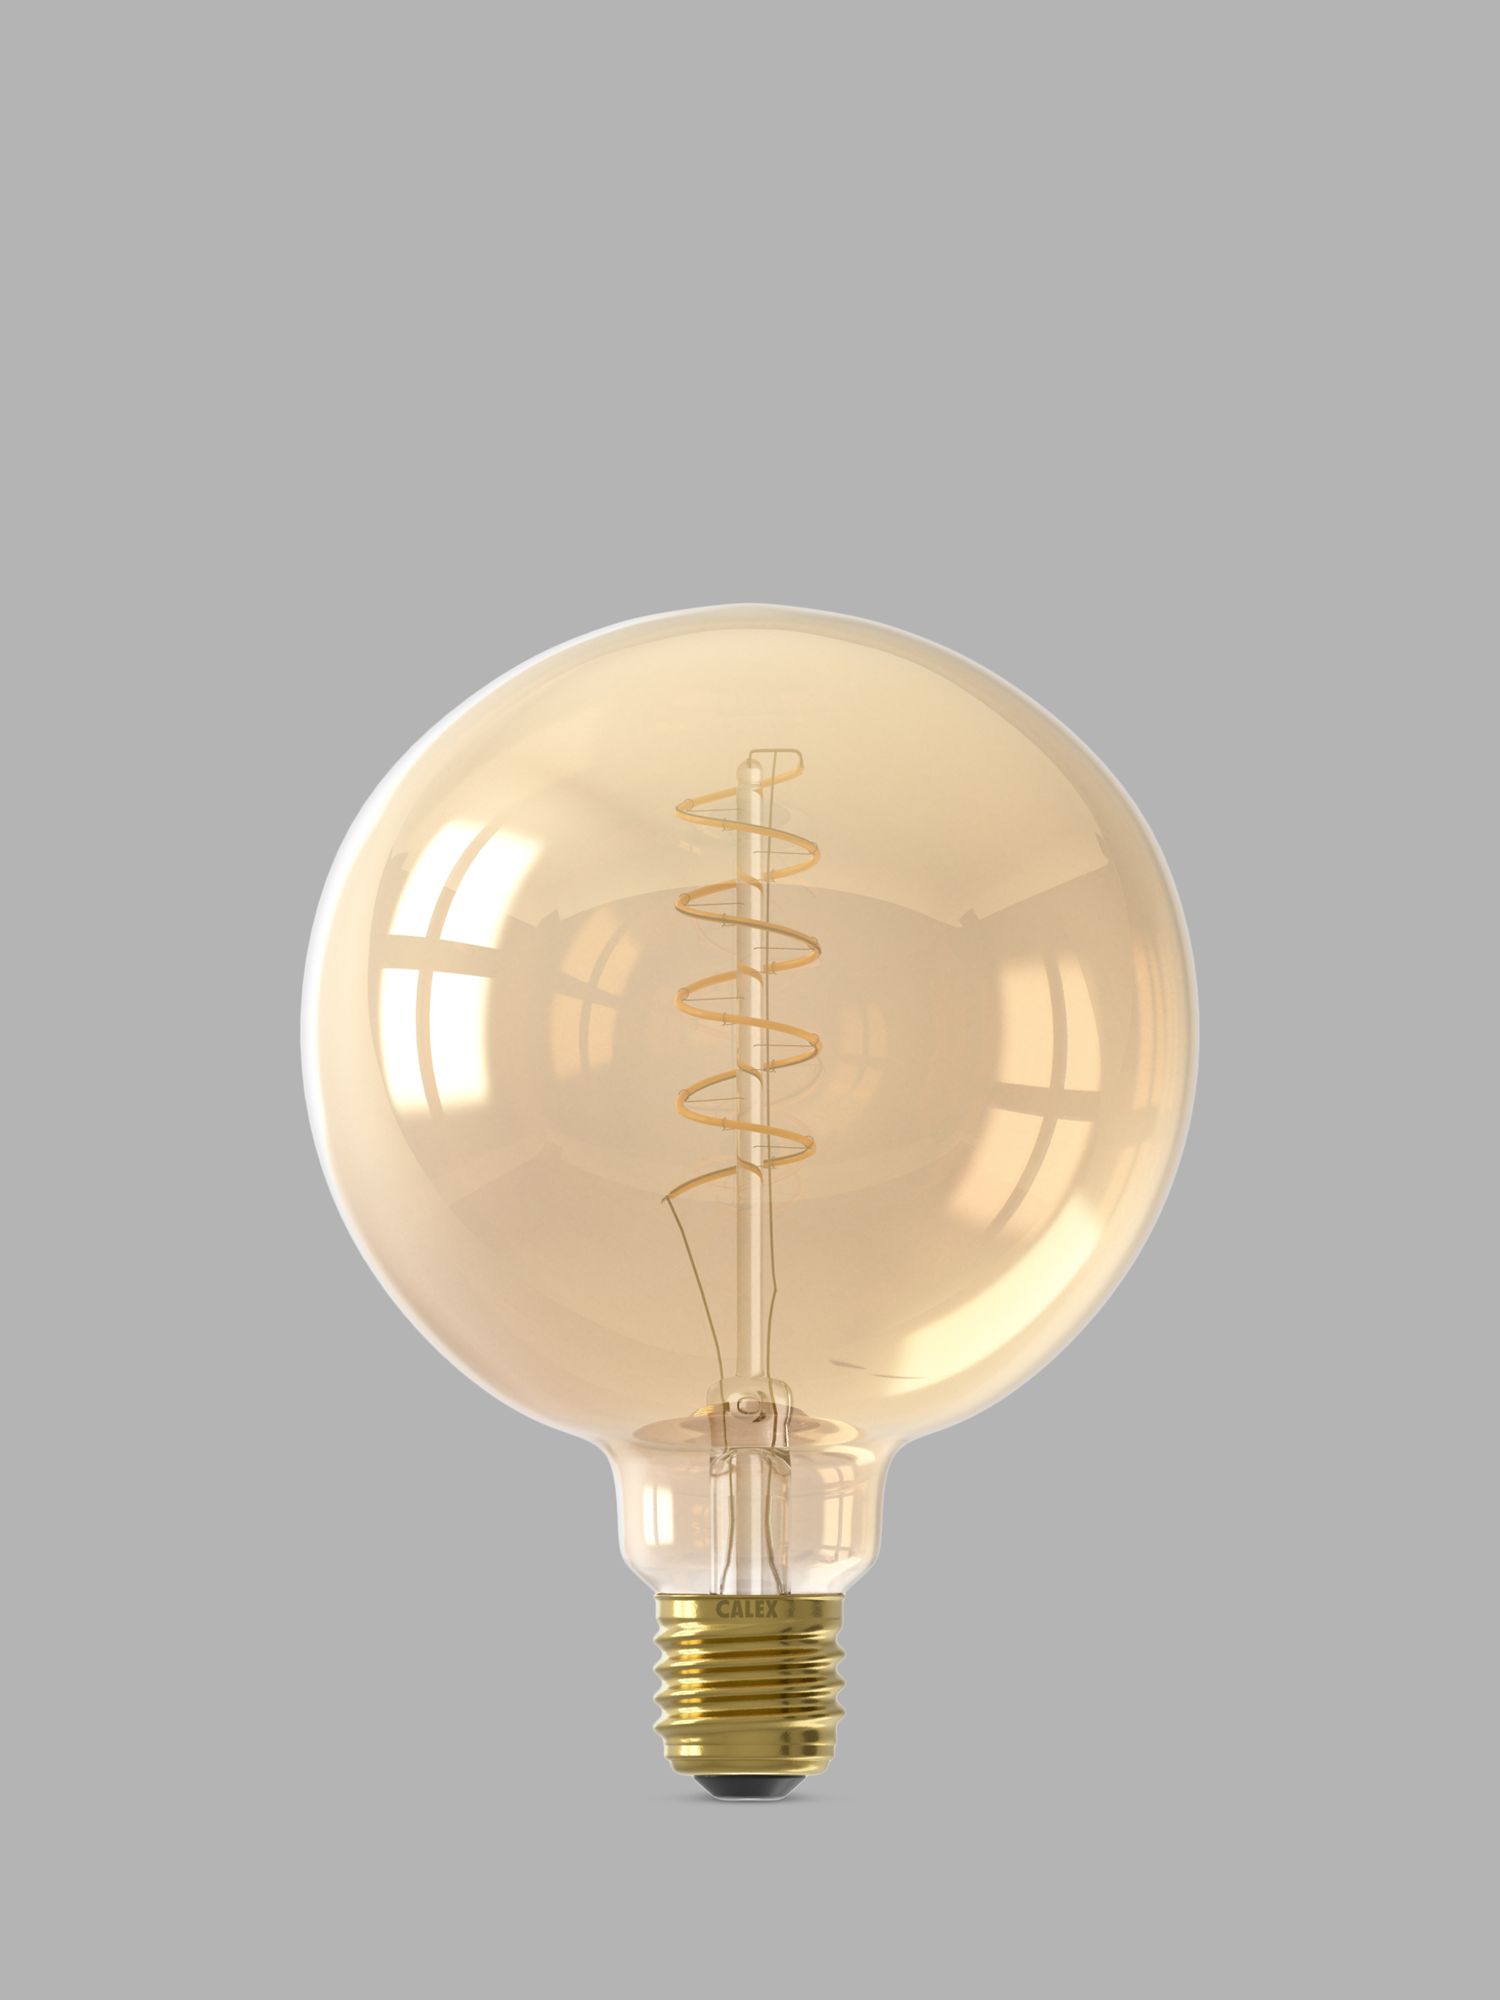 Photo of Calex 3.8w es led curly filament dimmable g125 globe bulb gold